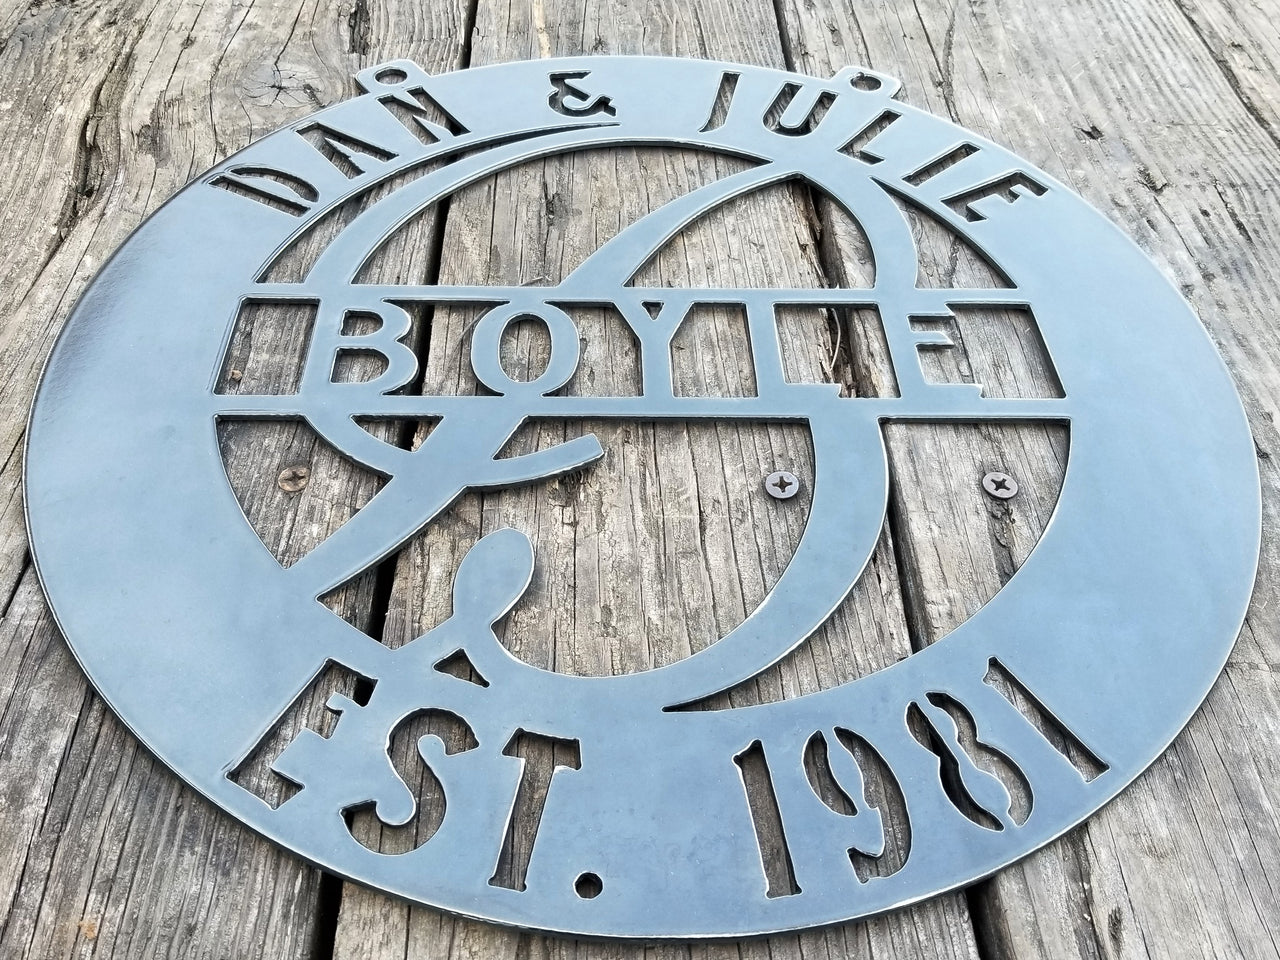 This is a round metal monogram with 1/2" dog ears for hanging that reads, " Dan & Julie, Boyle, Established 1981"